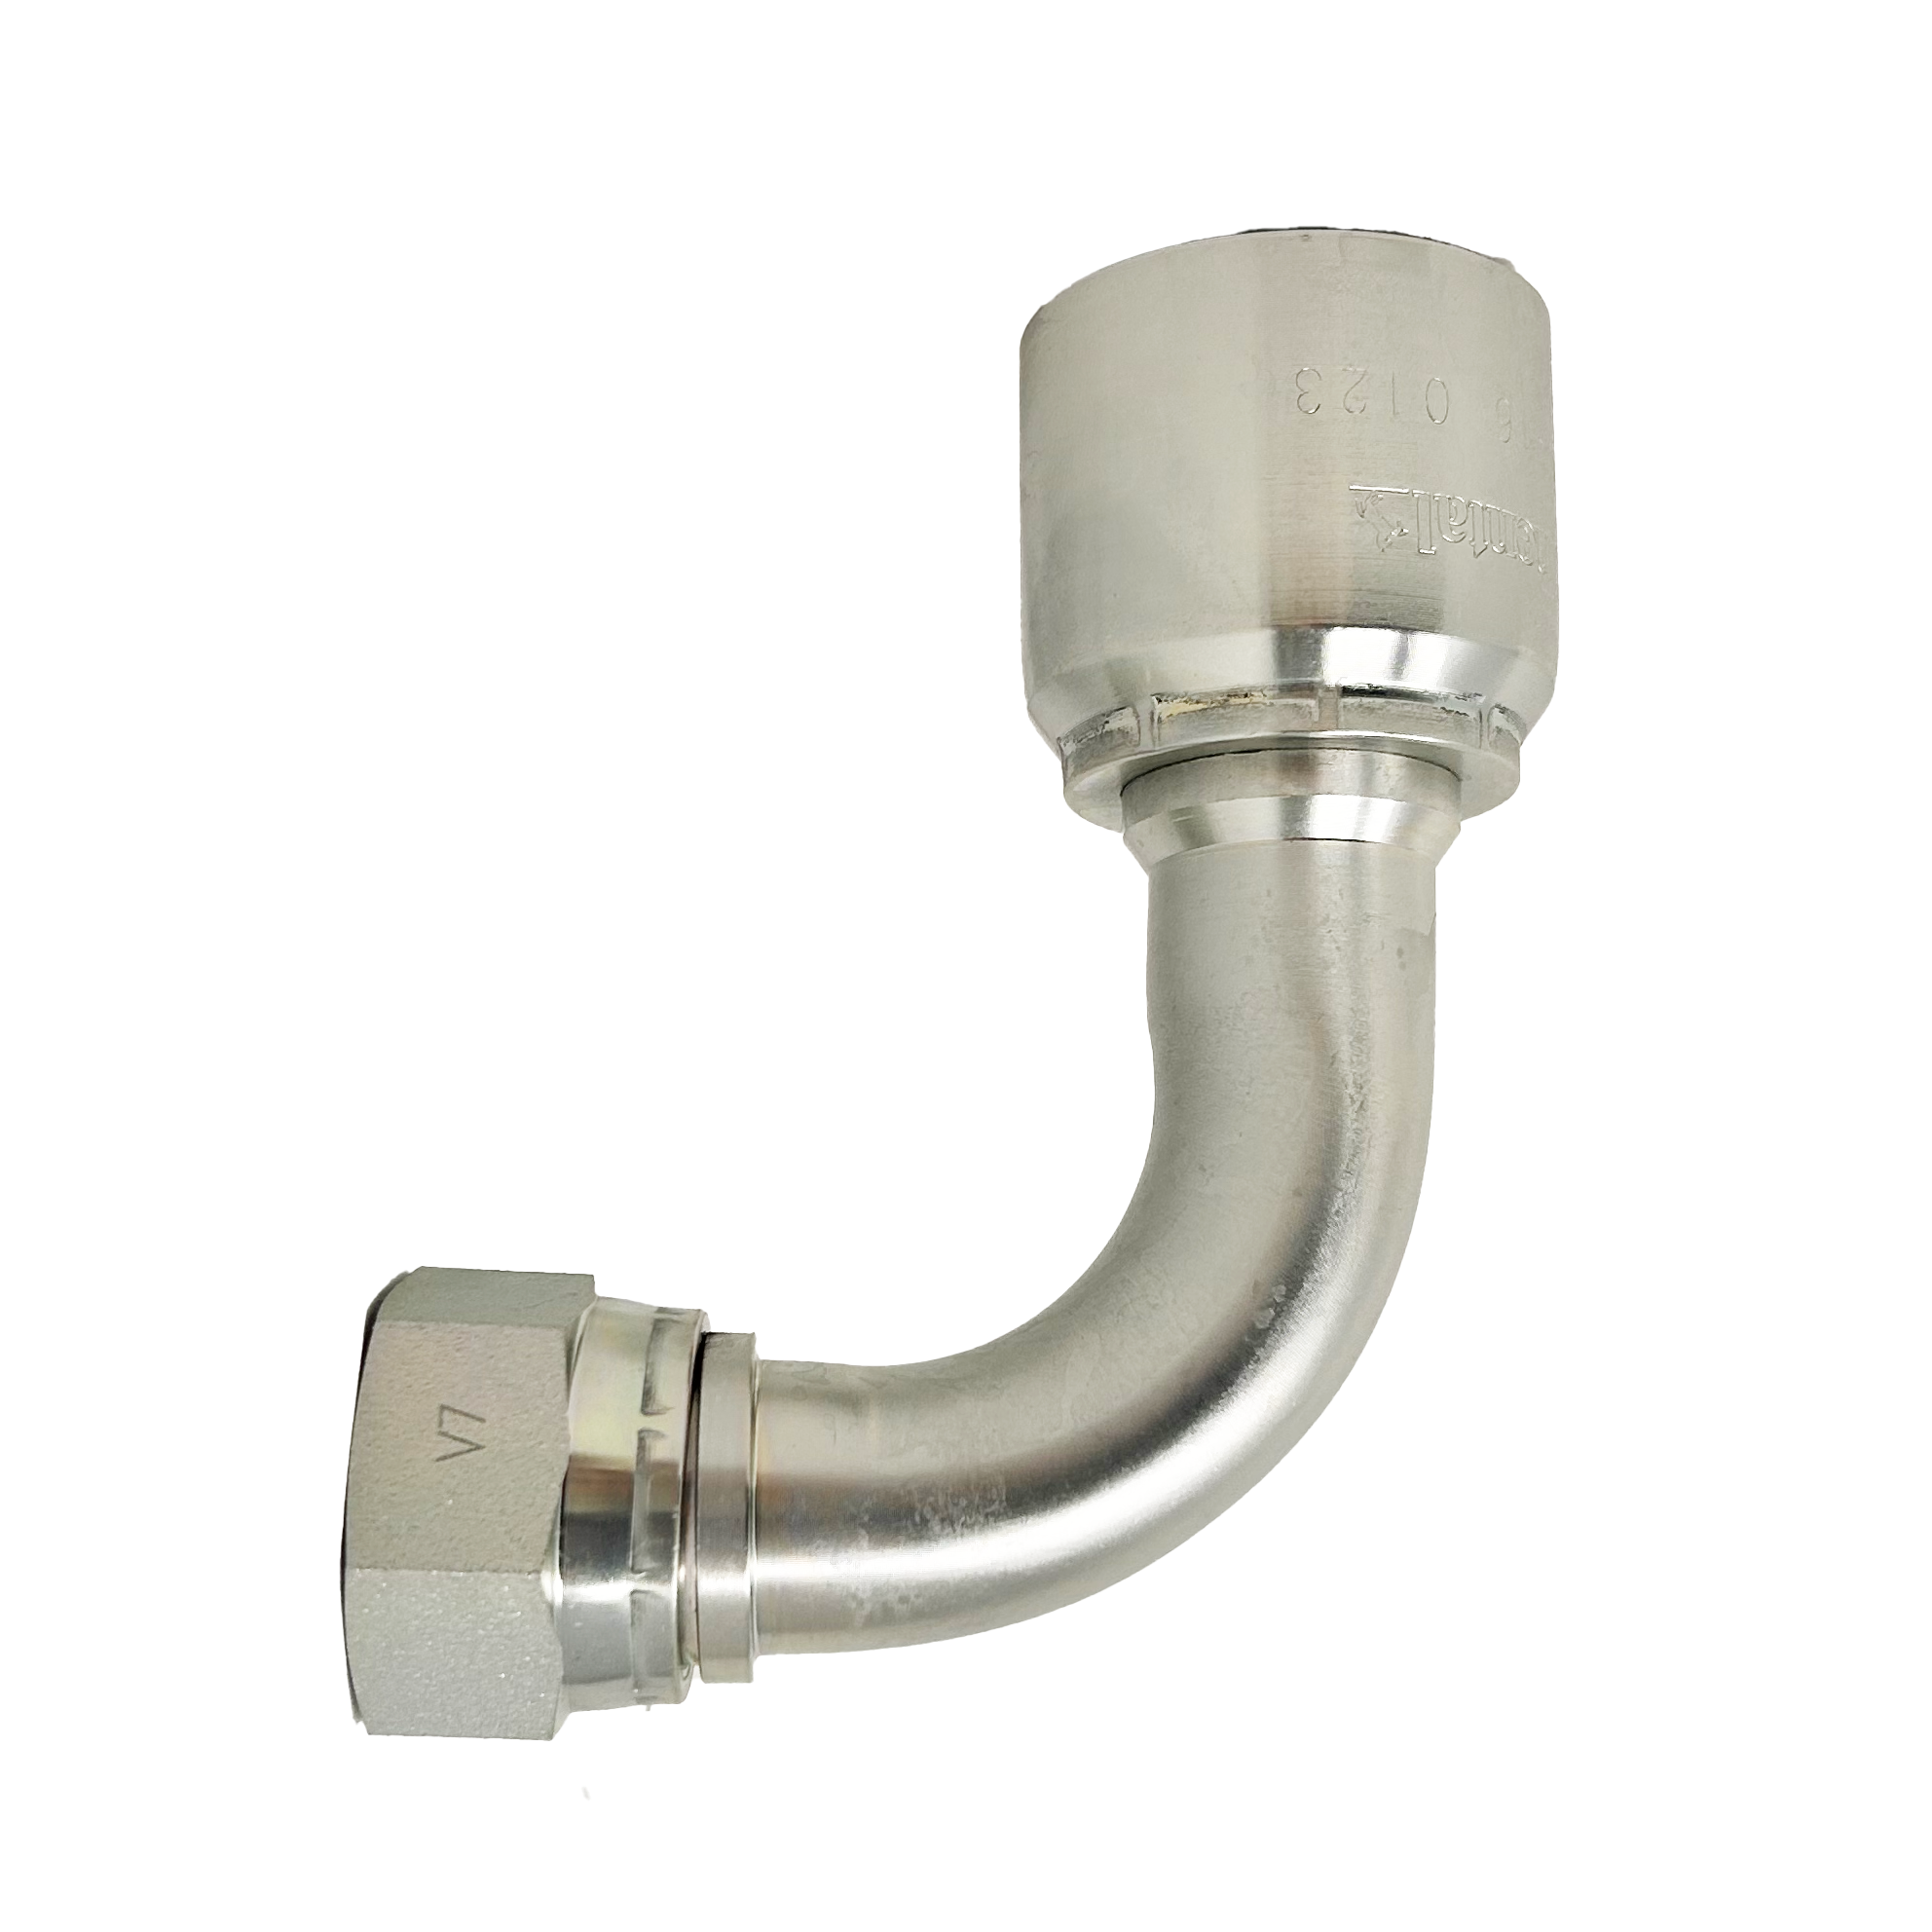 B2-JCFX90-0604S: Continental Hose Fitting, 0.375 (3/8") Hose ID x 7/16-20 Female JIC, 90-Degree Swivel Connection